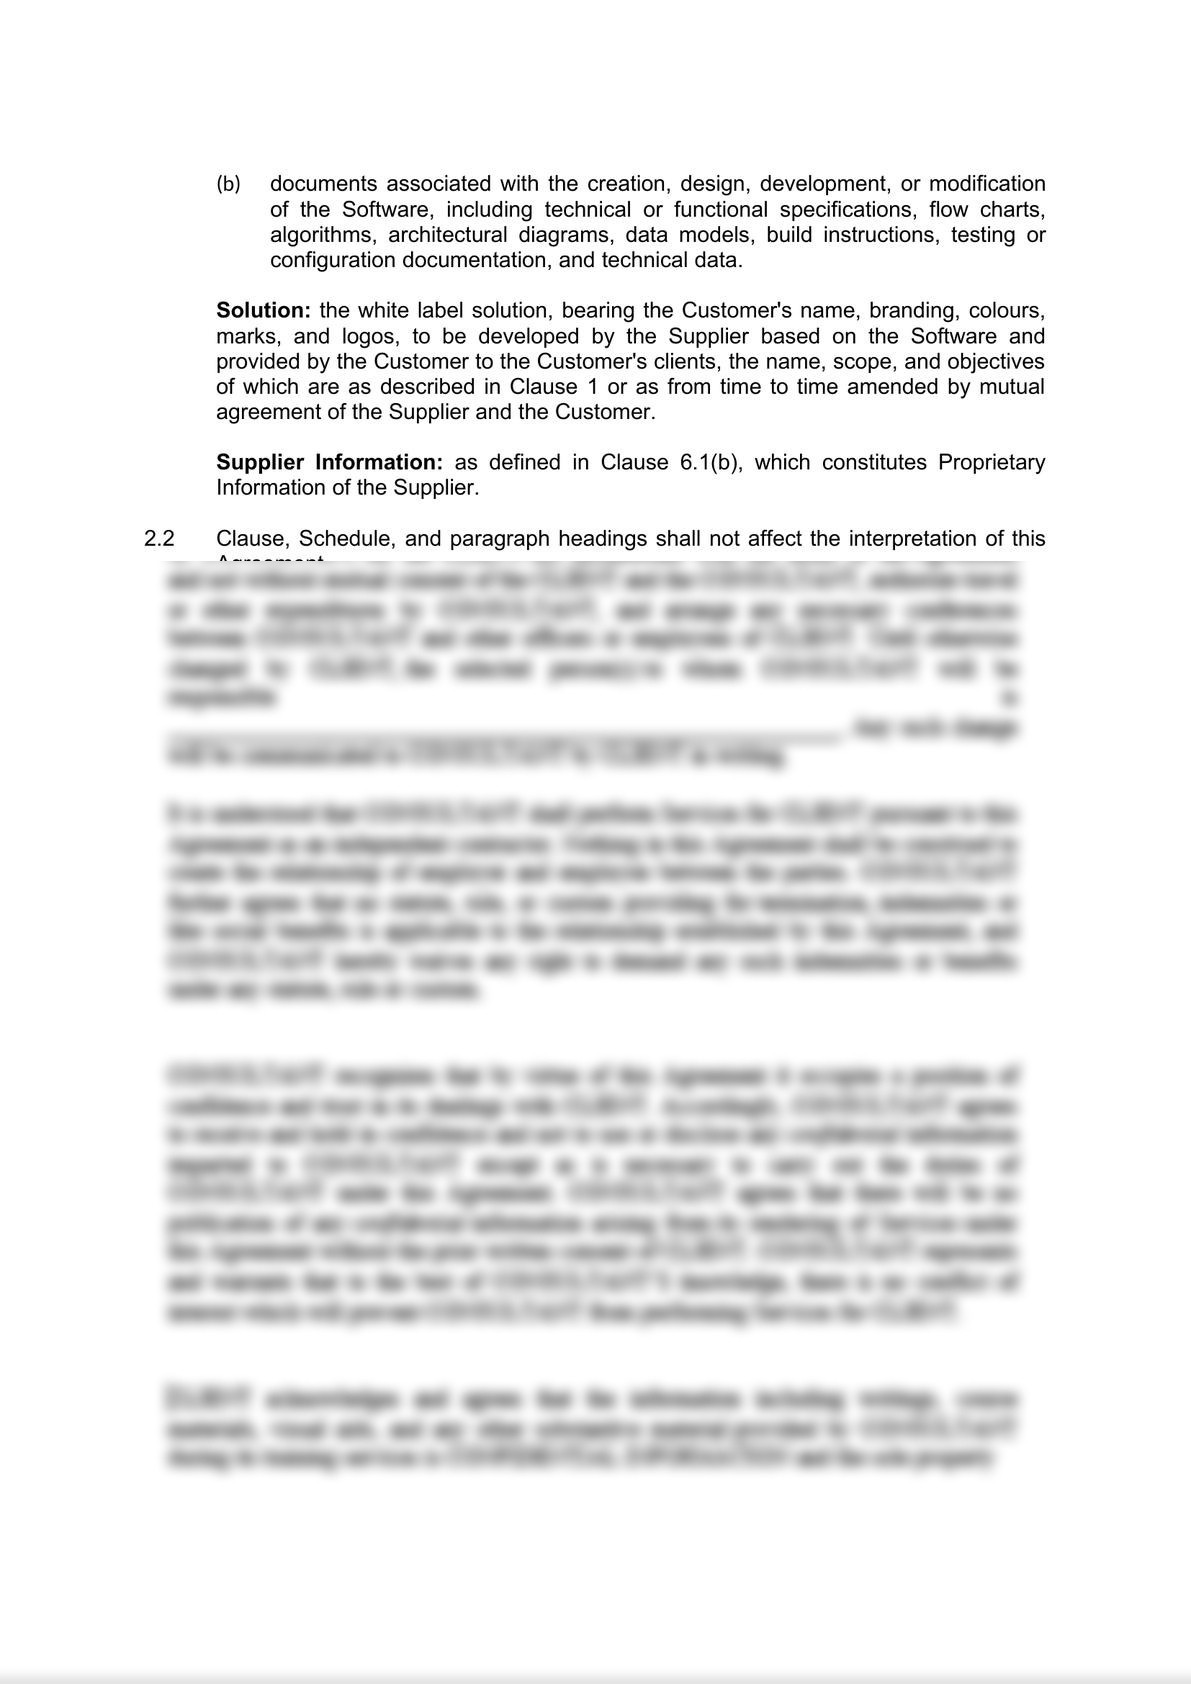 White Label Solution Agreement-2